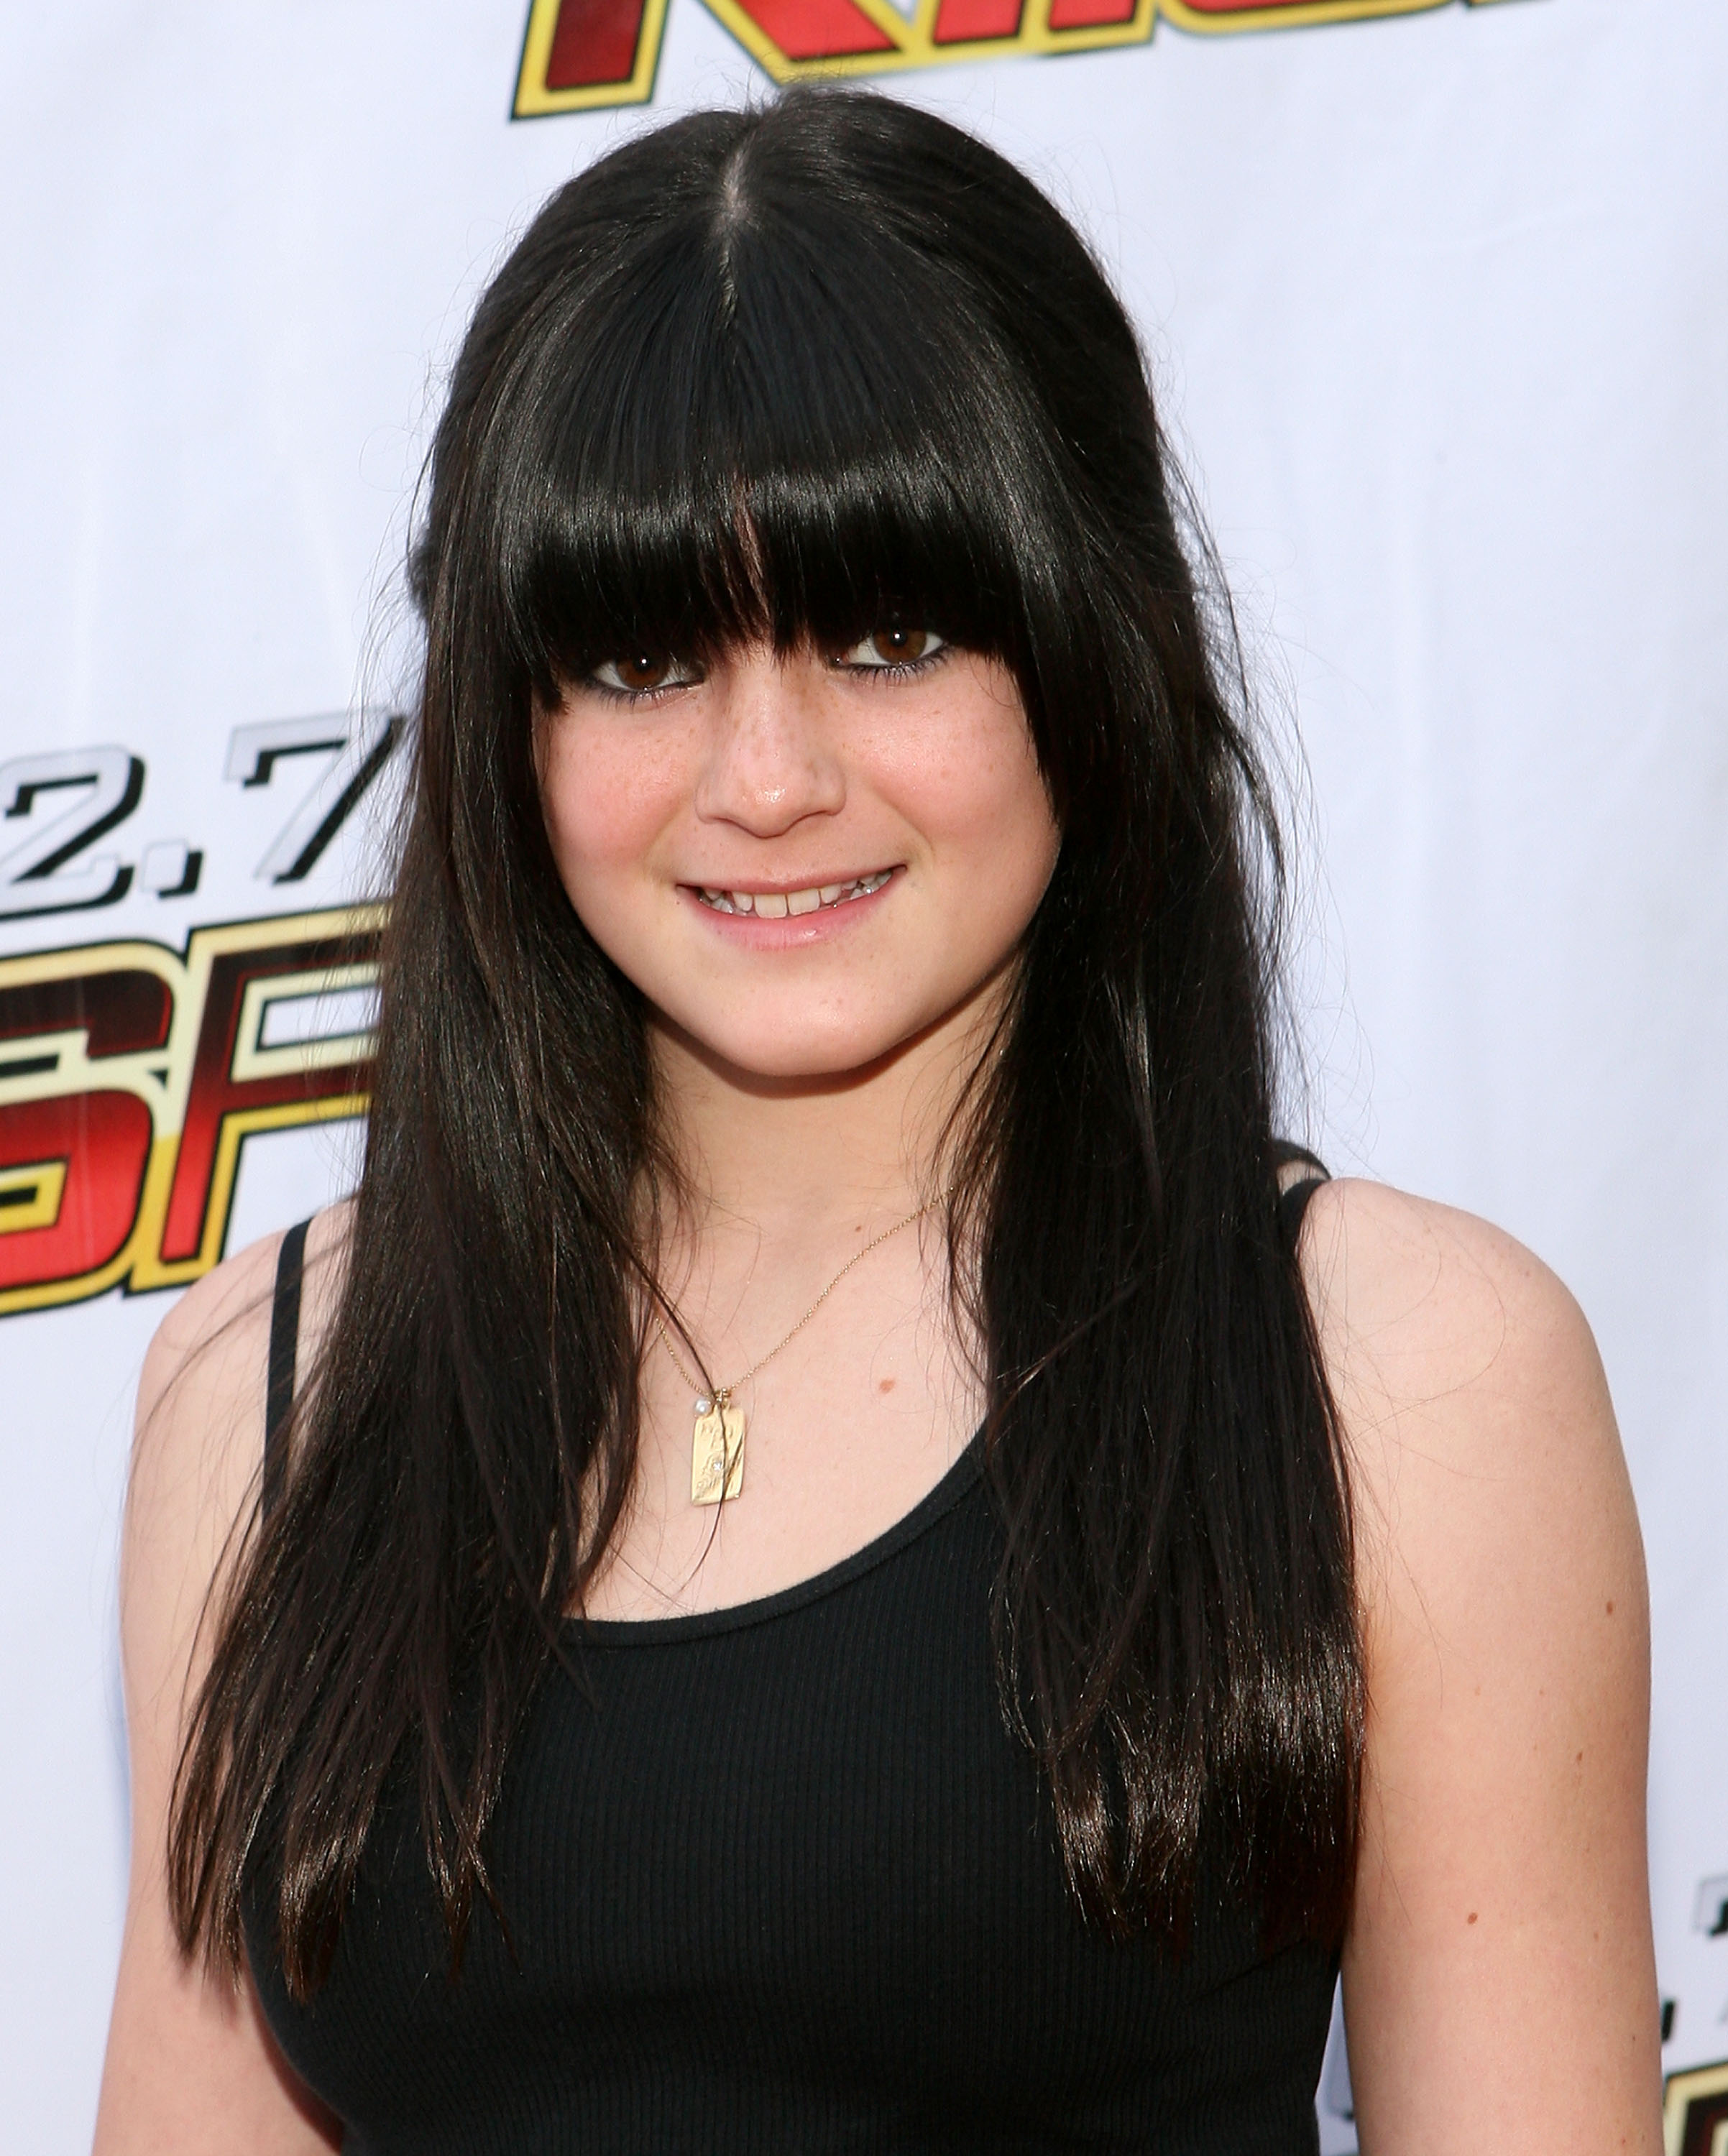 Kylie Jenner arrives at 102.7 KIIS-FM's Wango Tango 2009 at the Verizon Wireless Amphitheater on May 9, 2009 in Irvine, California. | Source: Getty Images